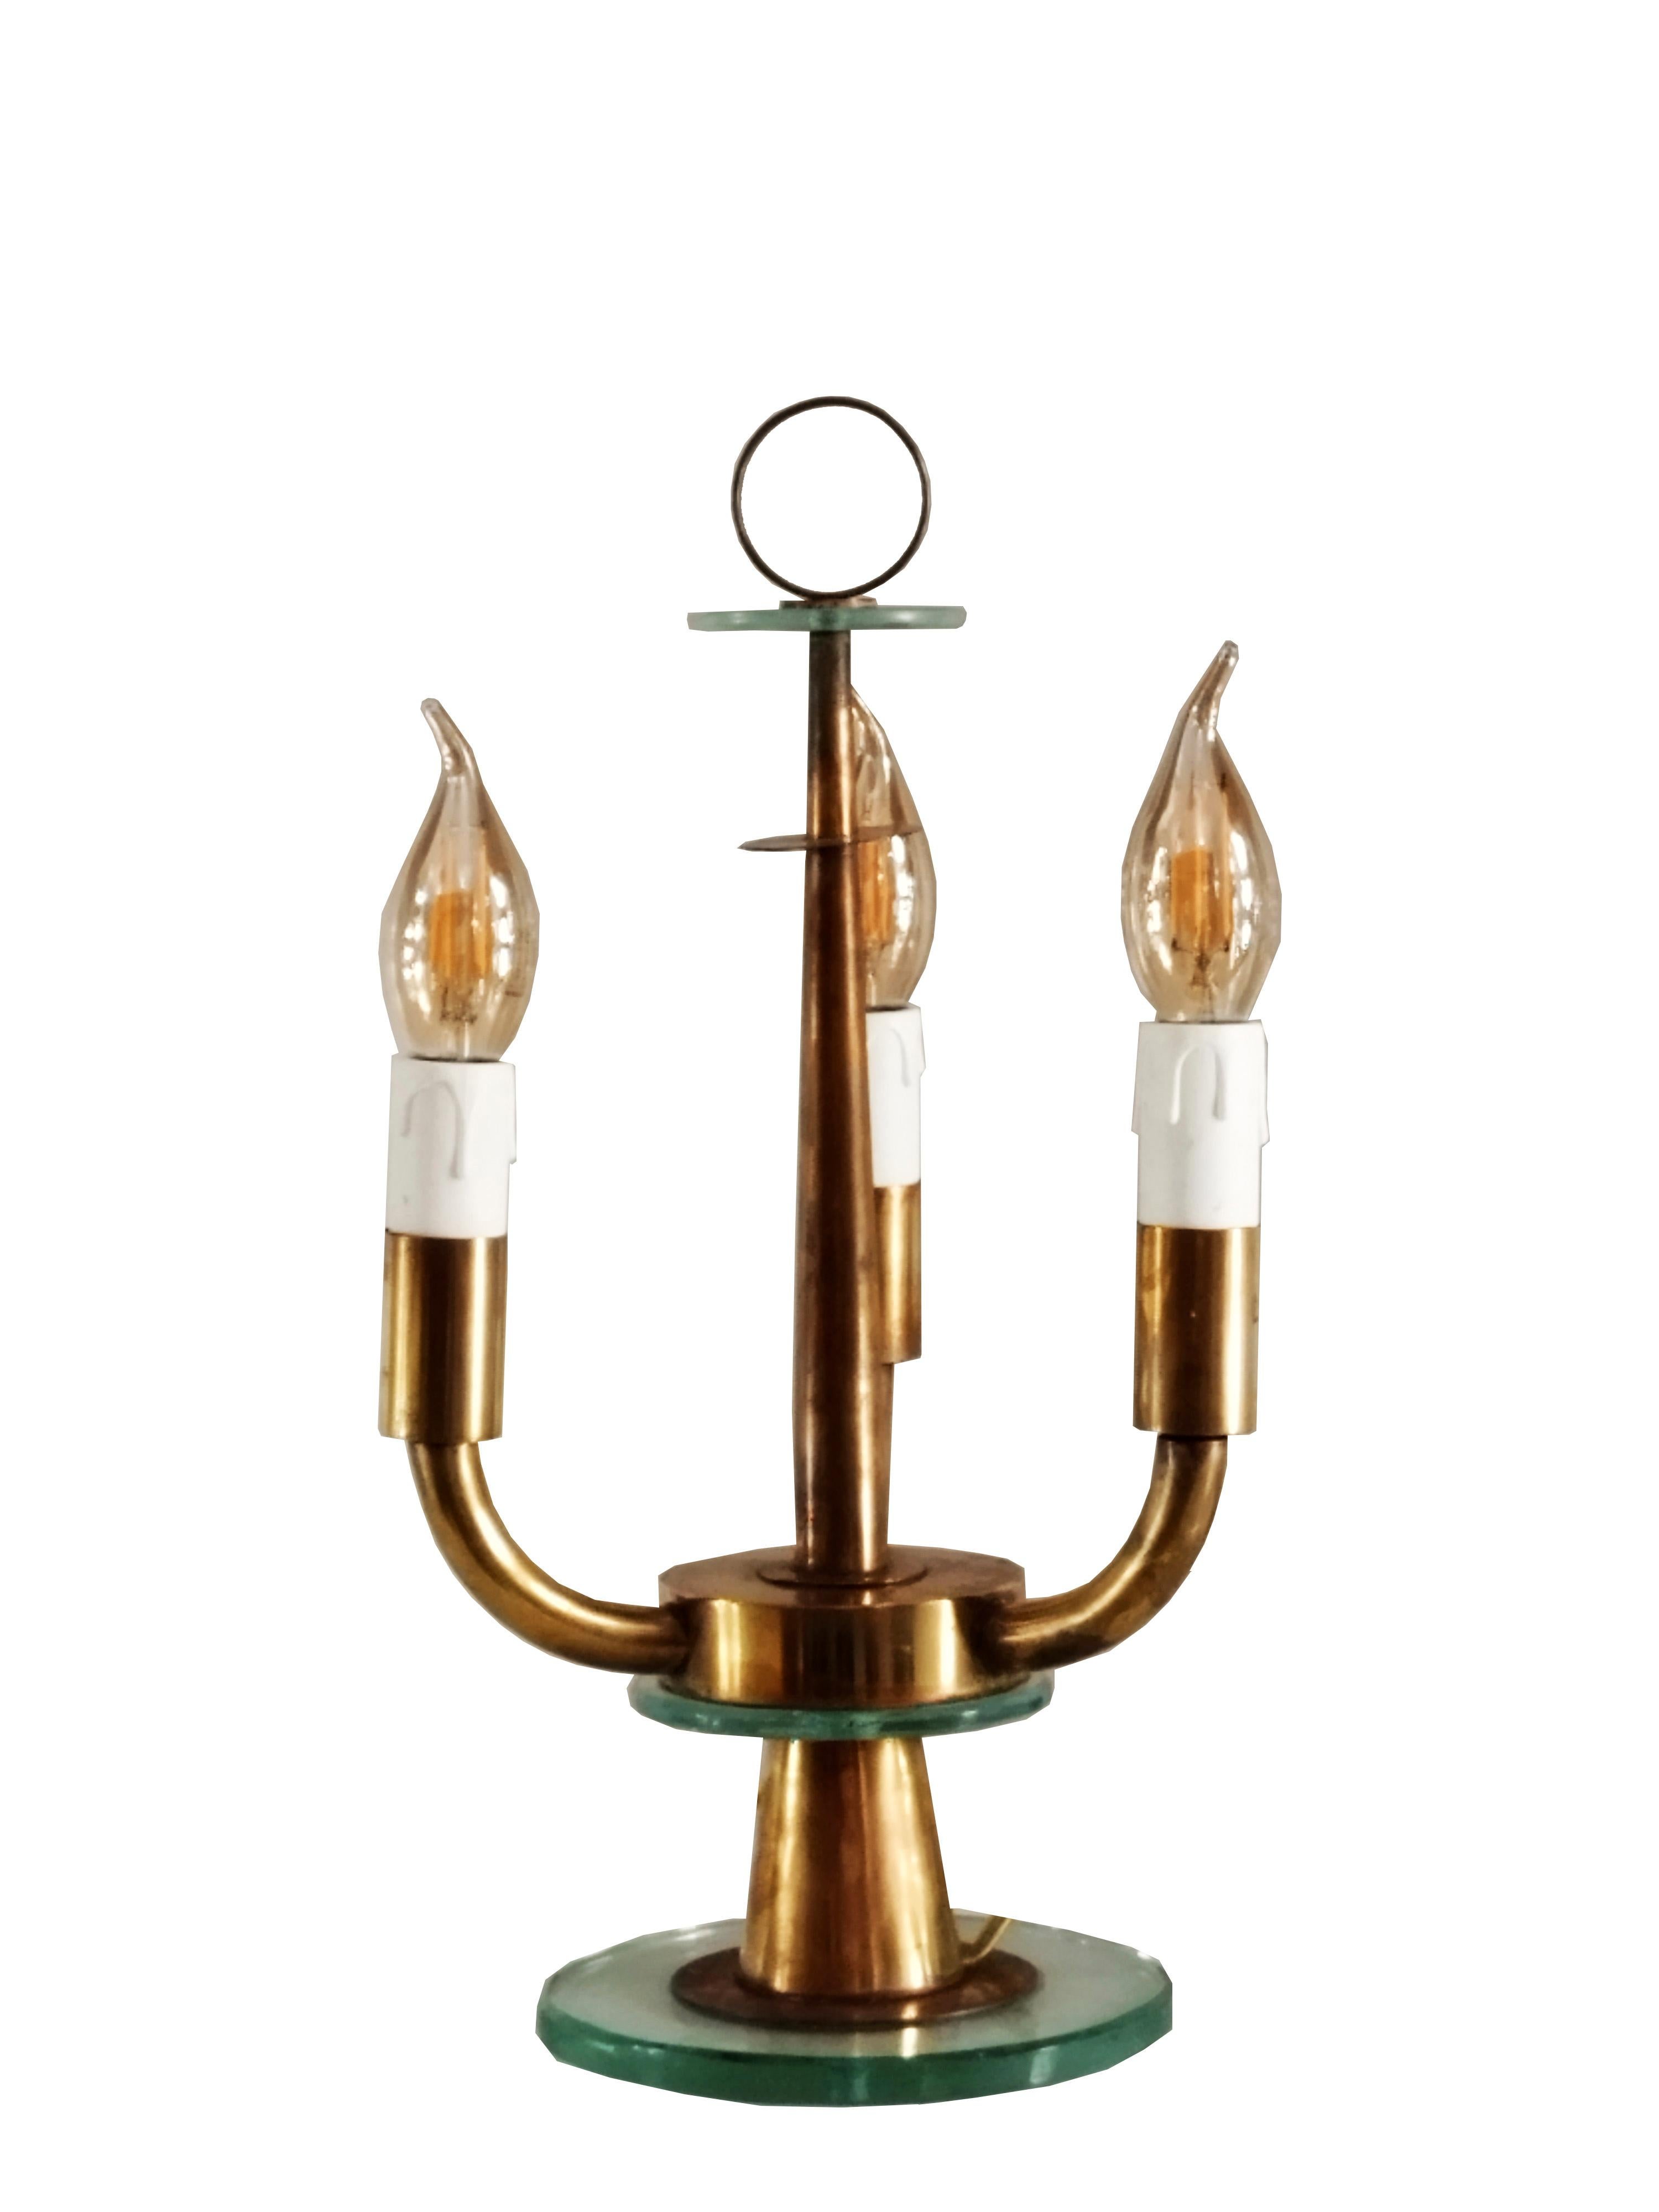 Table lamp from the late 1940s by designer Pietro Chiesa, artistic director of Fontana Arte until 1948. In the table lamp, the particular wear of the brass and grinding of the glass, with its Nile green hue, make the lamp fascinating and elegant. In